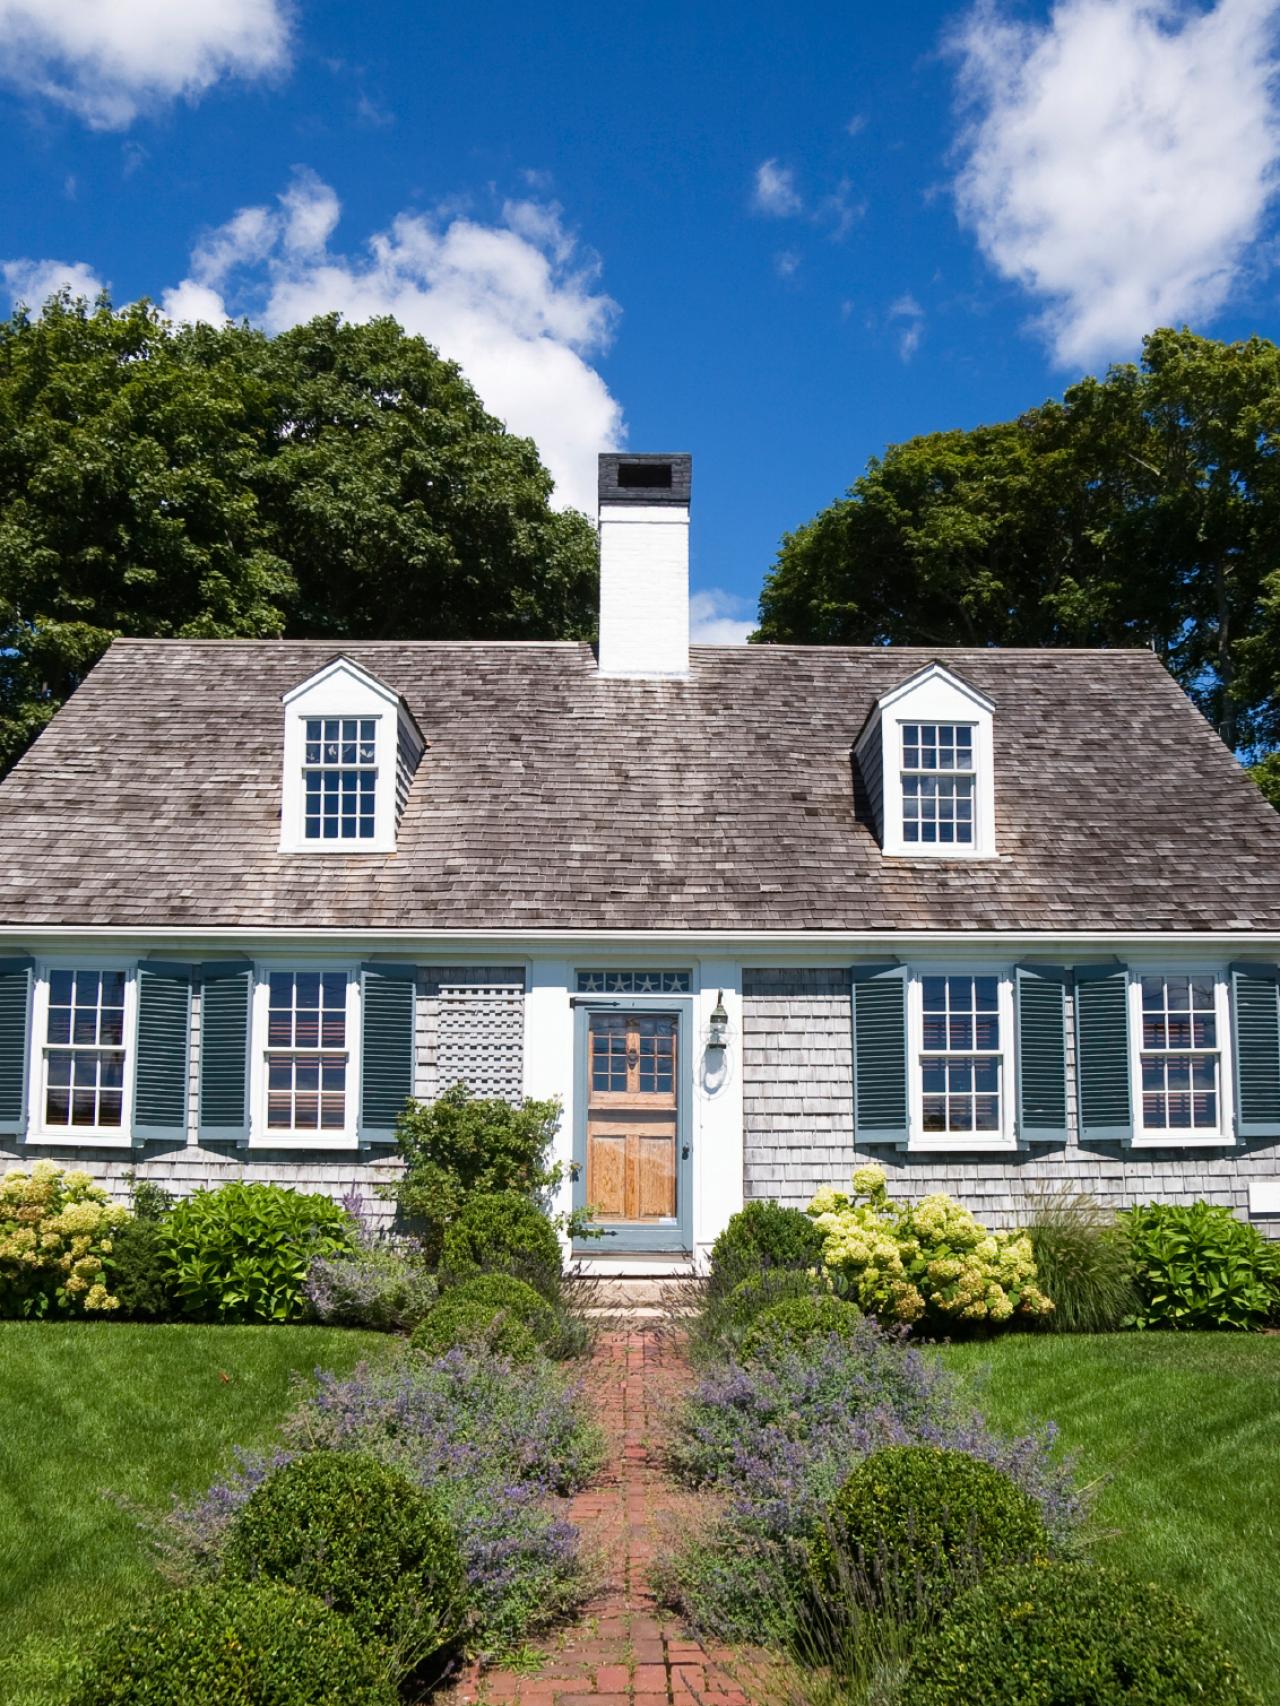 Cape Cod-Style Homes | Interior Design Styles and Color Schemes for 